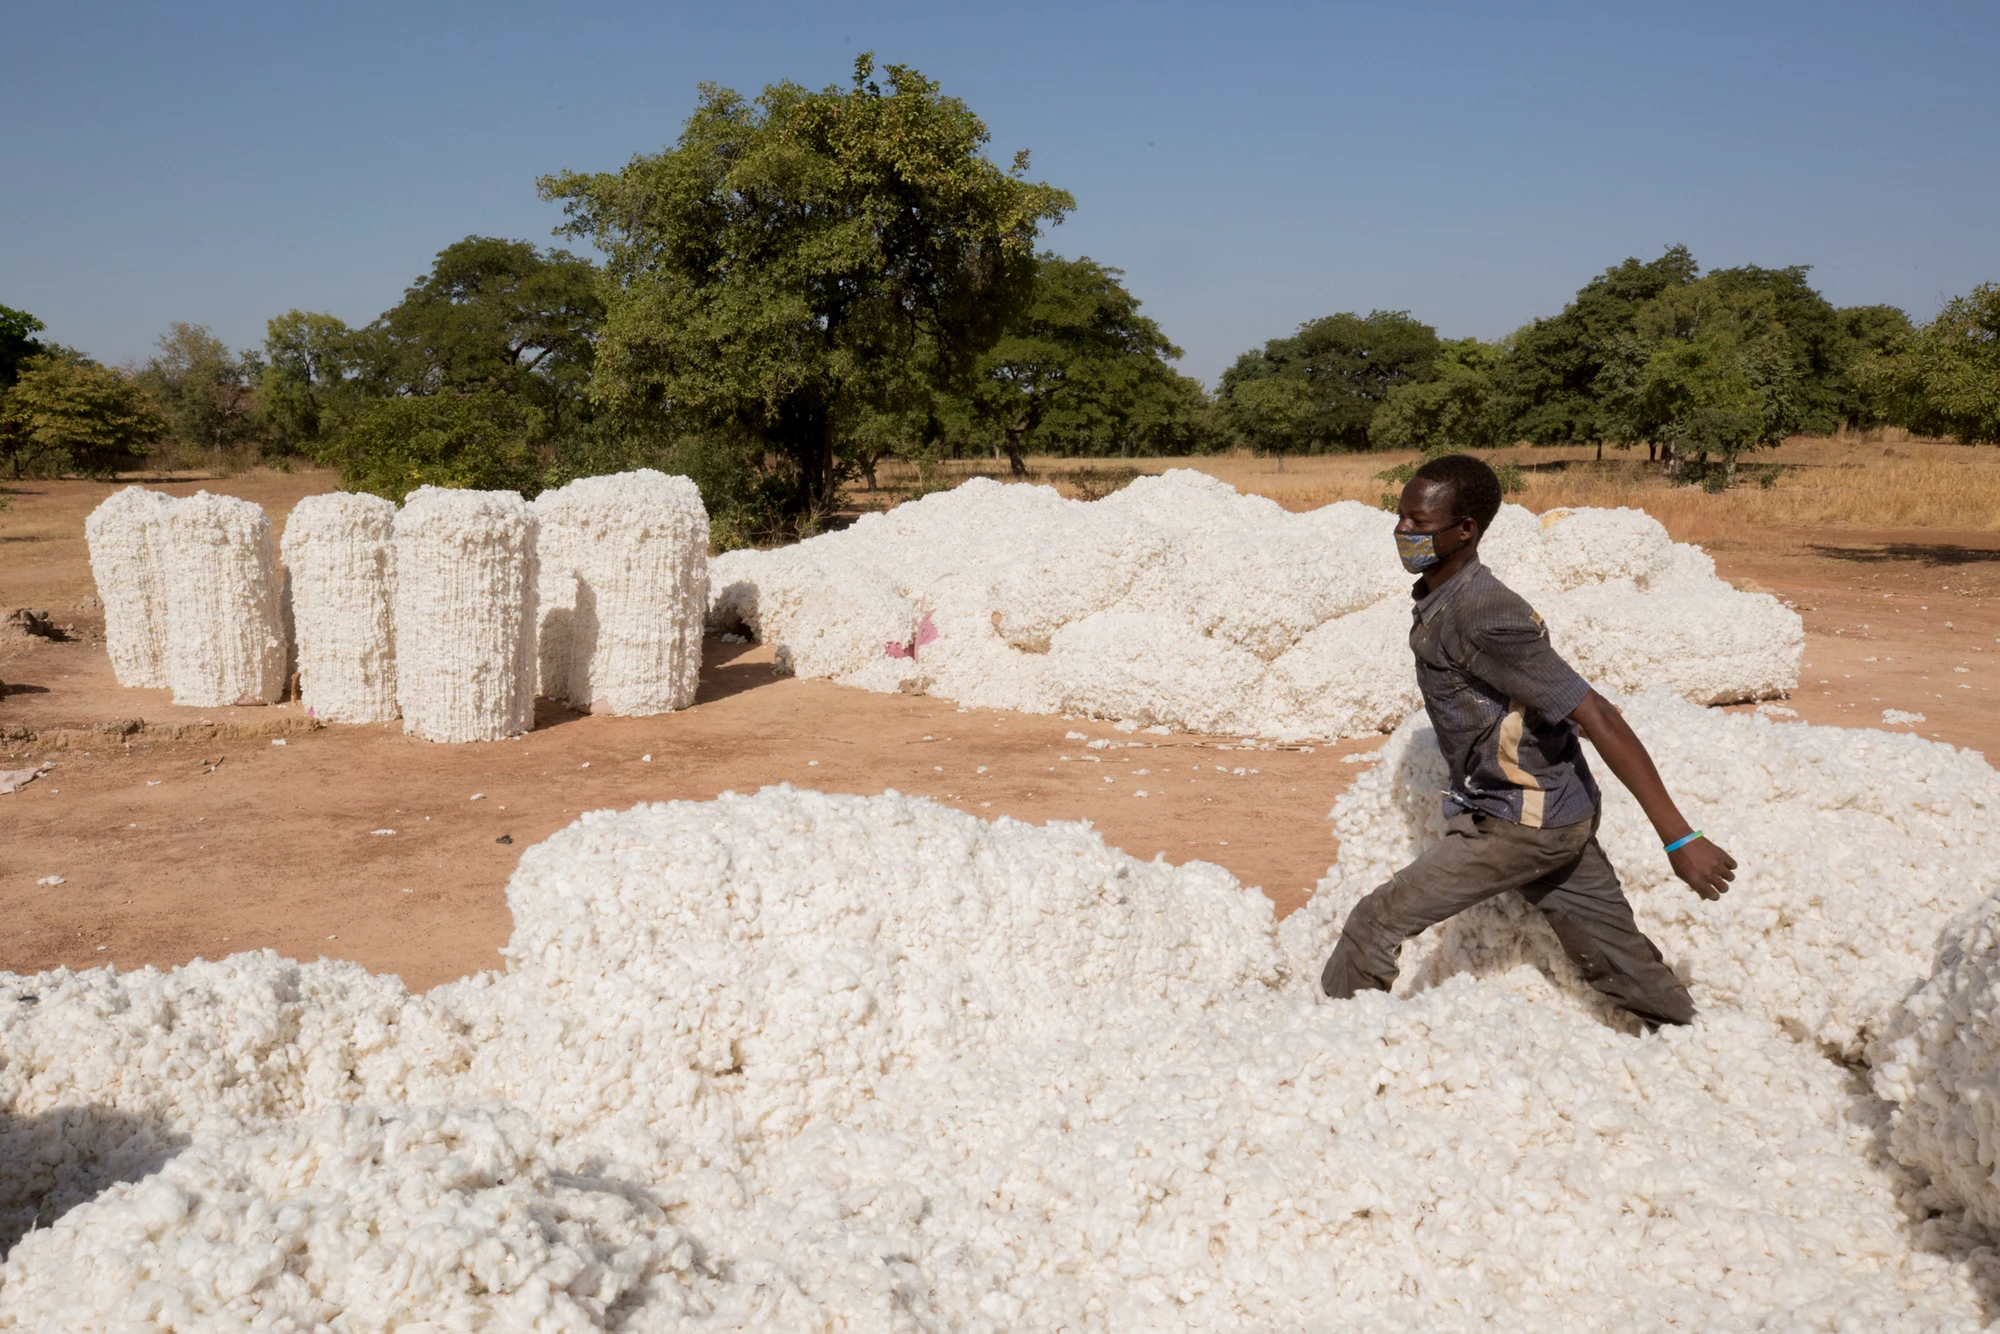 Farmers preparing to weigh their cotton on scales to be sold to Sofitex in Koumbia Village, Burkina Faso. Photo: Dominic Chavez/IFC